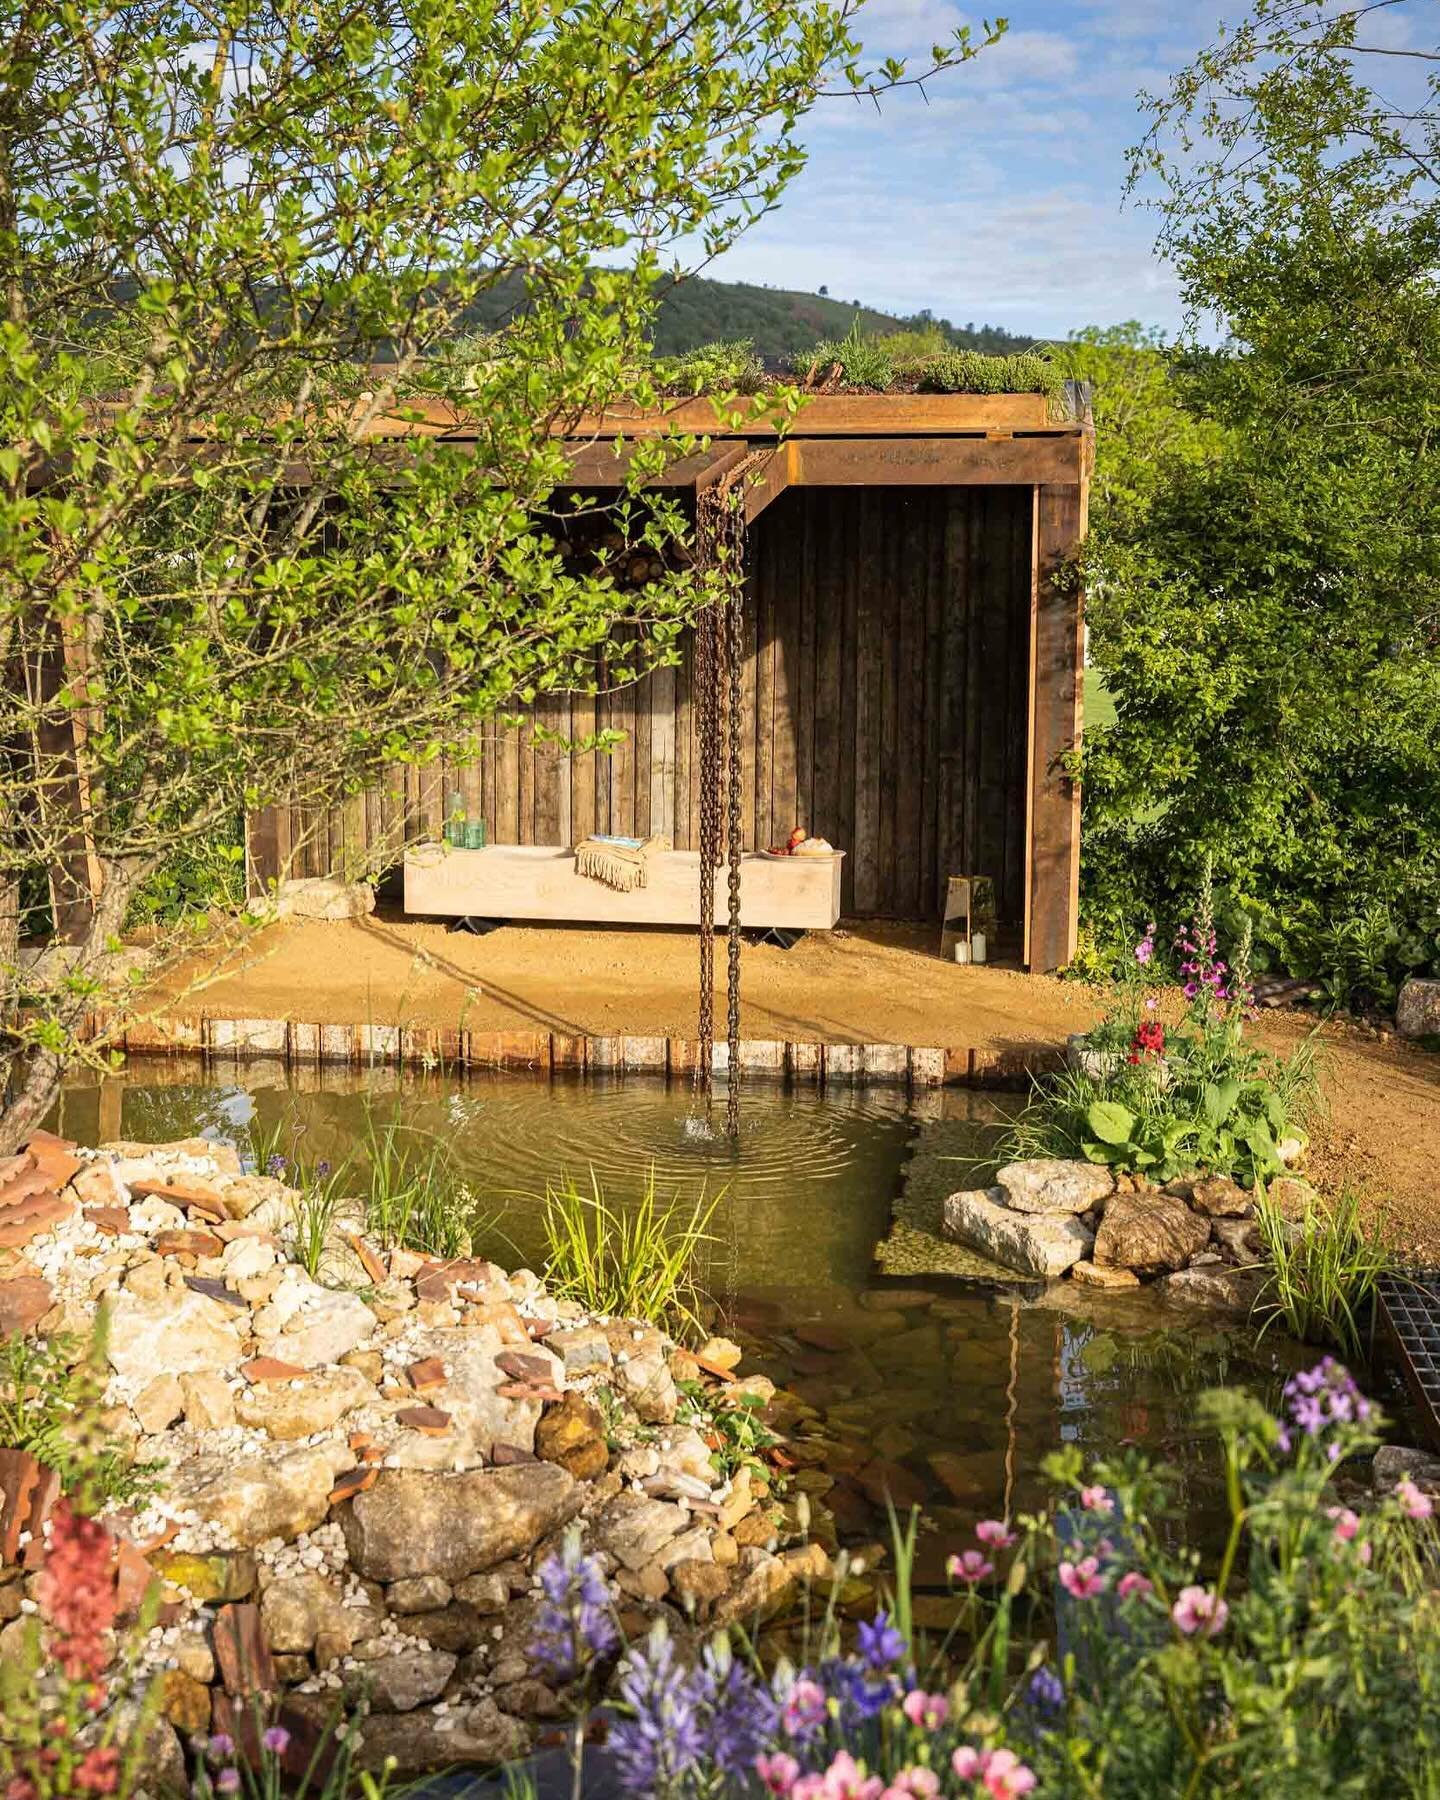 It&rsquo;s not long now until #RHSMalvern2024 and I can&rsquo;t wait to see all the gardens again this year @malvernshows 
These images are of the amazing Wilder Spaces garden designed by @jamielanglandsgardens and built by @oxfordgardendesign.co.uk 